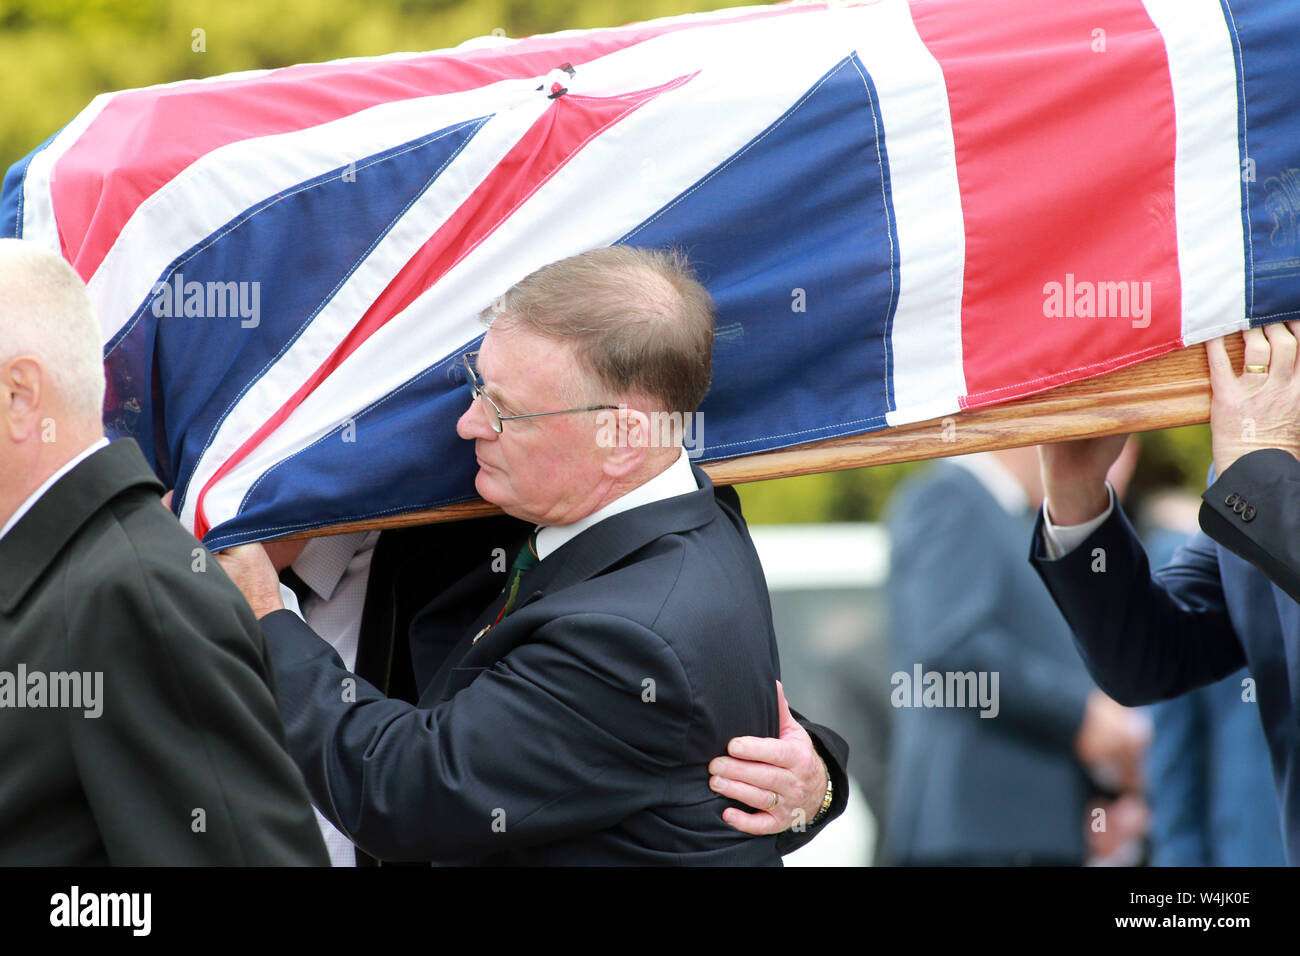 Joe Frazer (front) helps carry the coffin of his brother Willie Frazer for the funeral service at Five Mile Hill Full Gospel Fellowship Church on the Maytown Road, County Armagh, Monday July 1st, 2019. (Photo by Paul McErlane for the Belfast Telegraph) Stock Photo